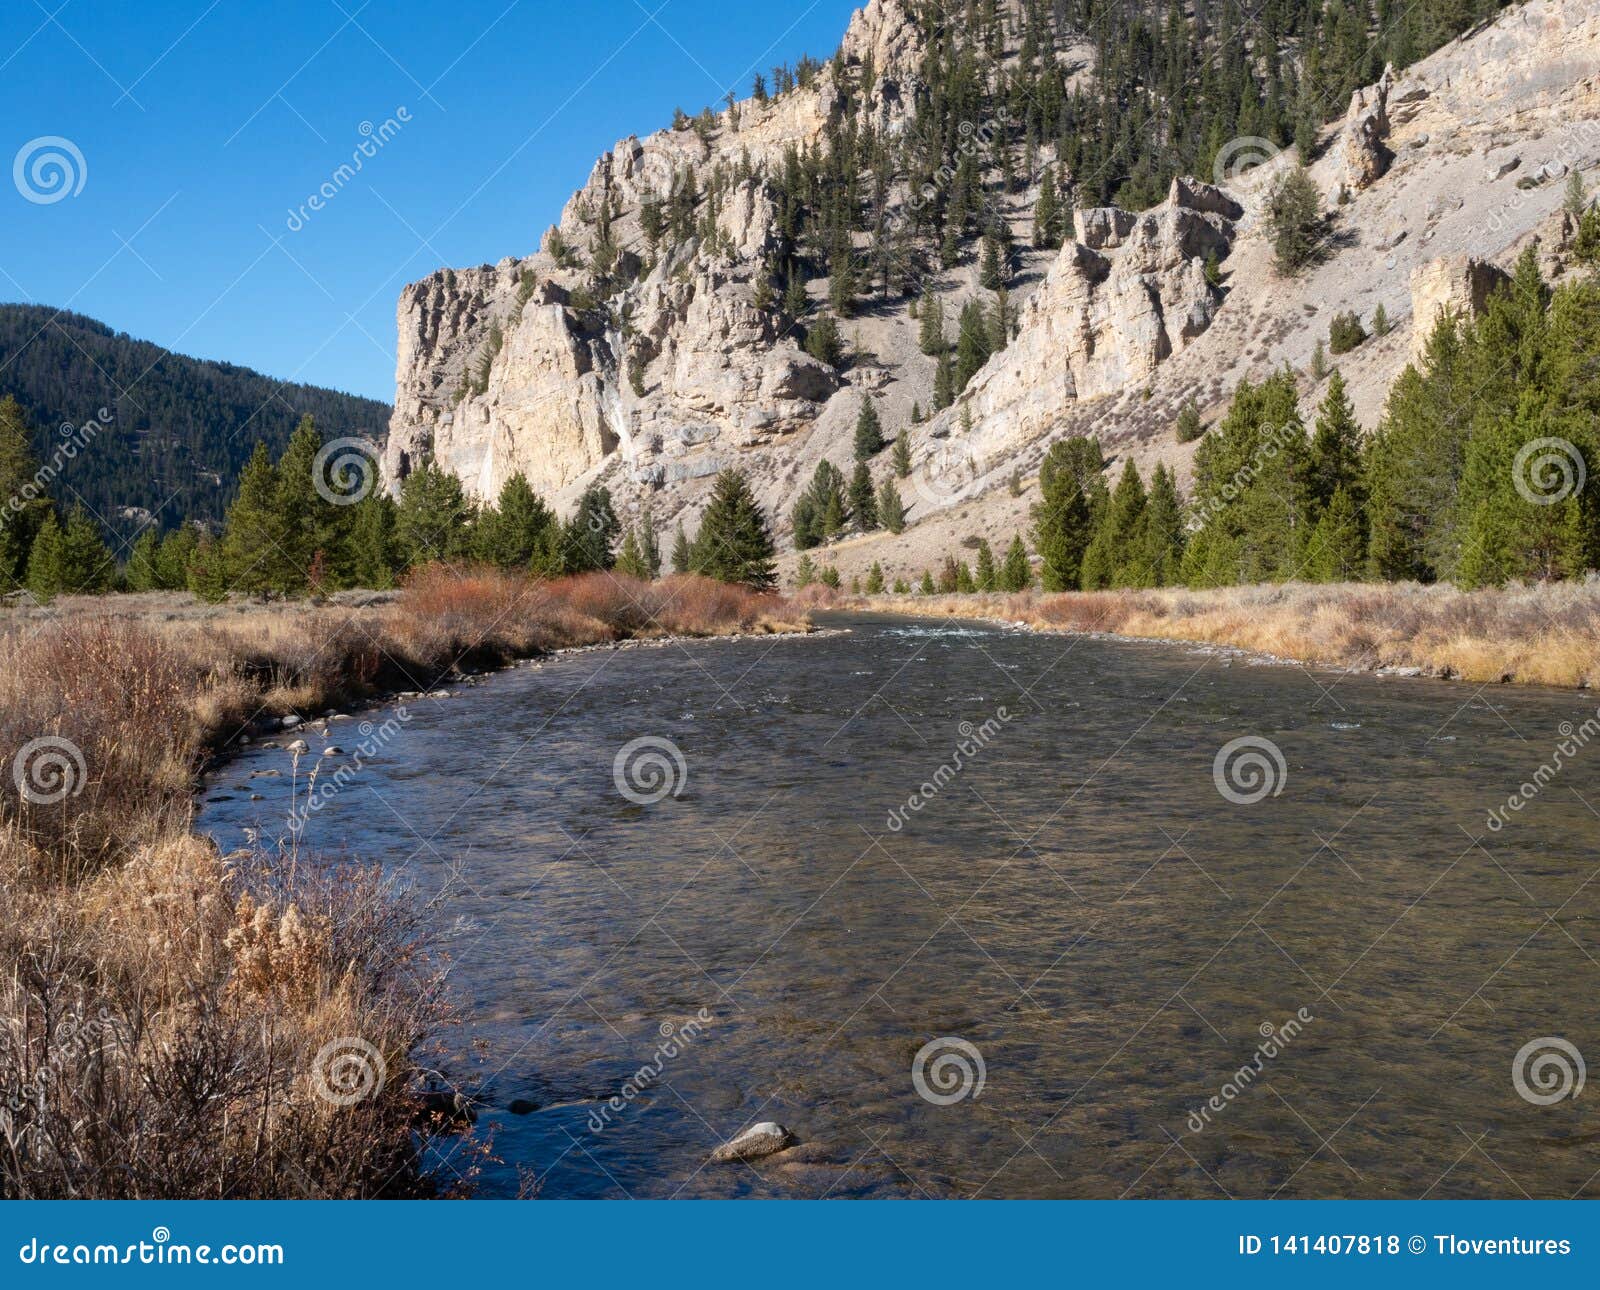 gallatin river with autumn vegetation and rocky cliffs